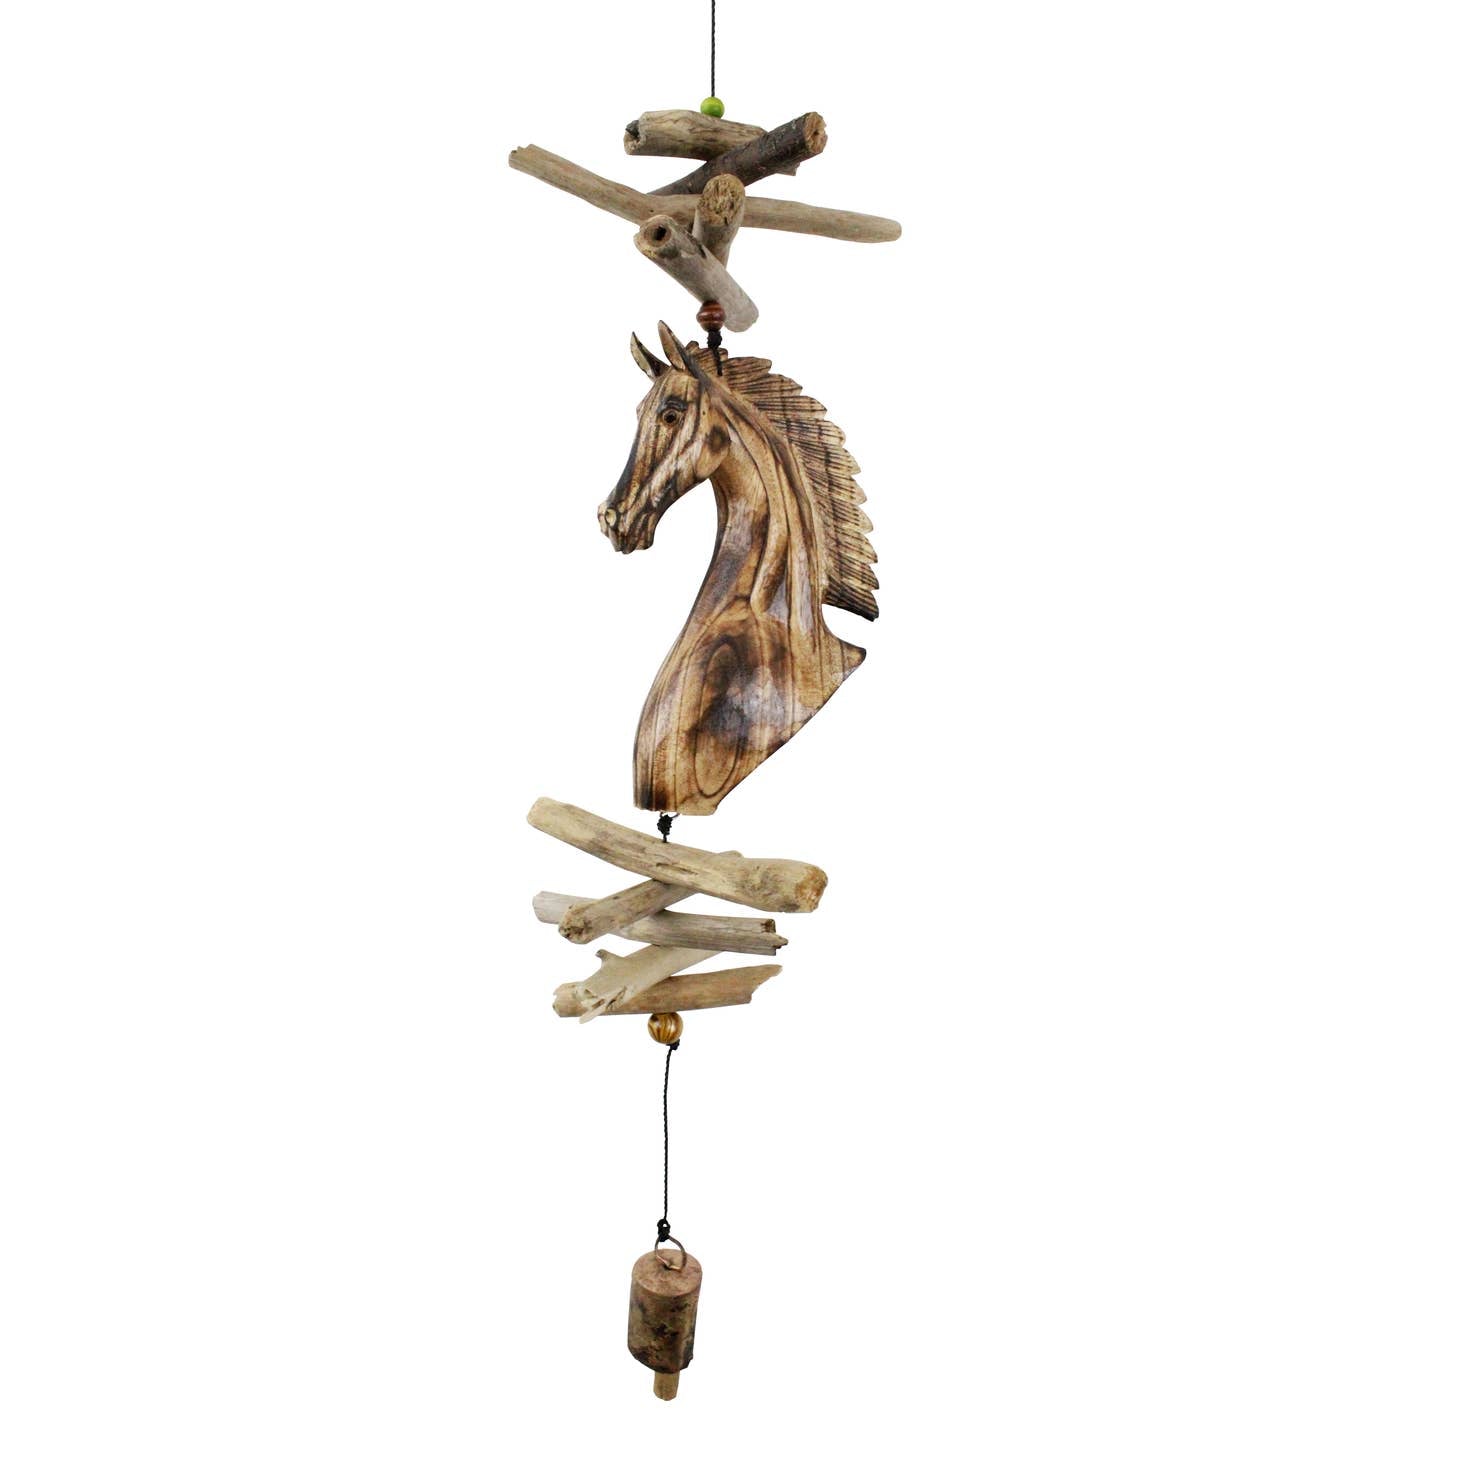 Horse Lovers Bell Wind Chime, white background.